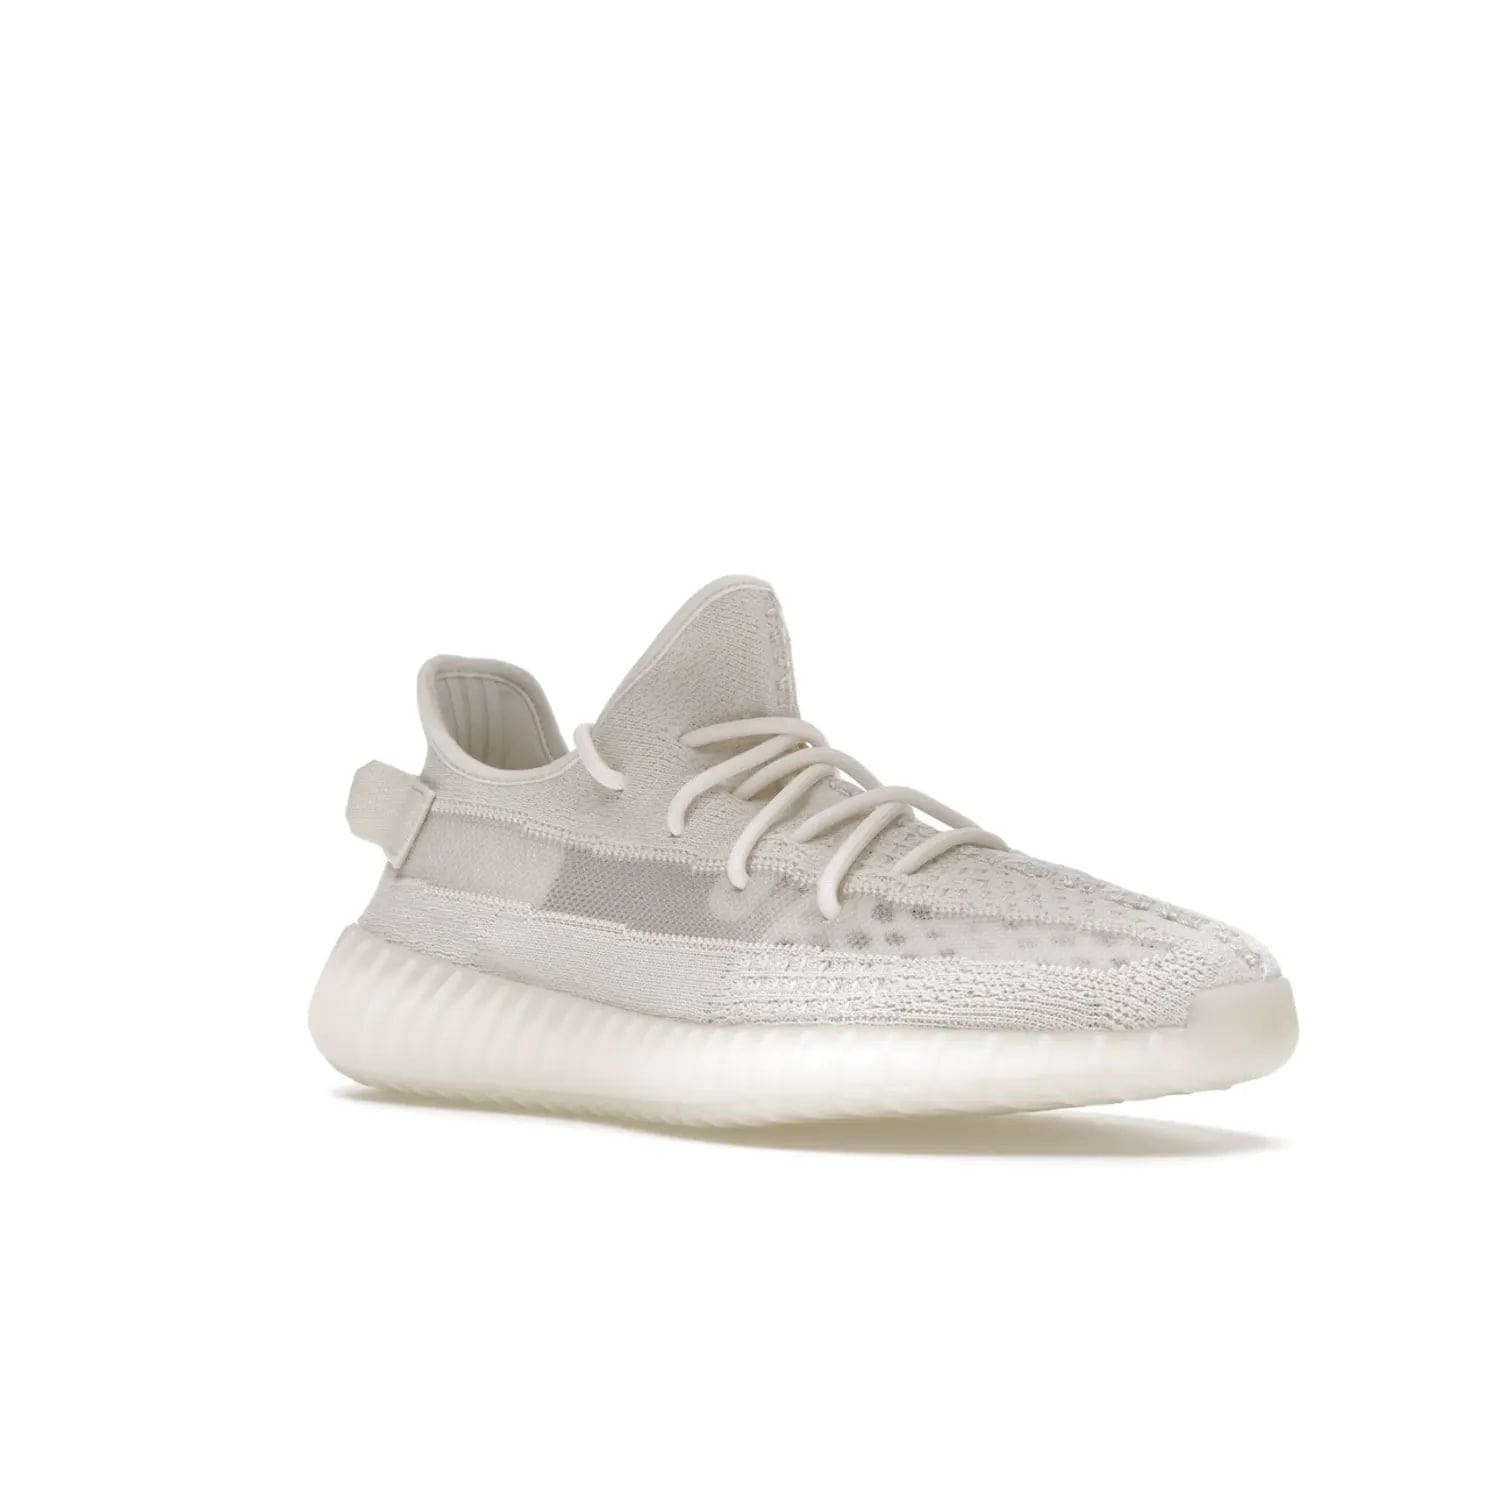 adidas Yeezy Boost 350 V2 Bone - Image 5 - Only at www.BallersClubKickz.com - Grab the stylish and comfortable adidas Yeezy Boost 350 V2 Bone in March 2022. This sneaker features a triple white Primeknit upper, mesh side stripes and canvas heel tabs, sitting atop a semi-translucent sole with Boost technology. Sure to keep your feet comfortable and stylish!